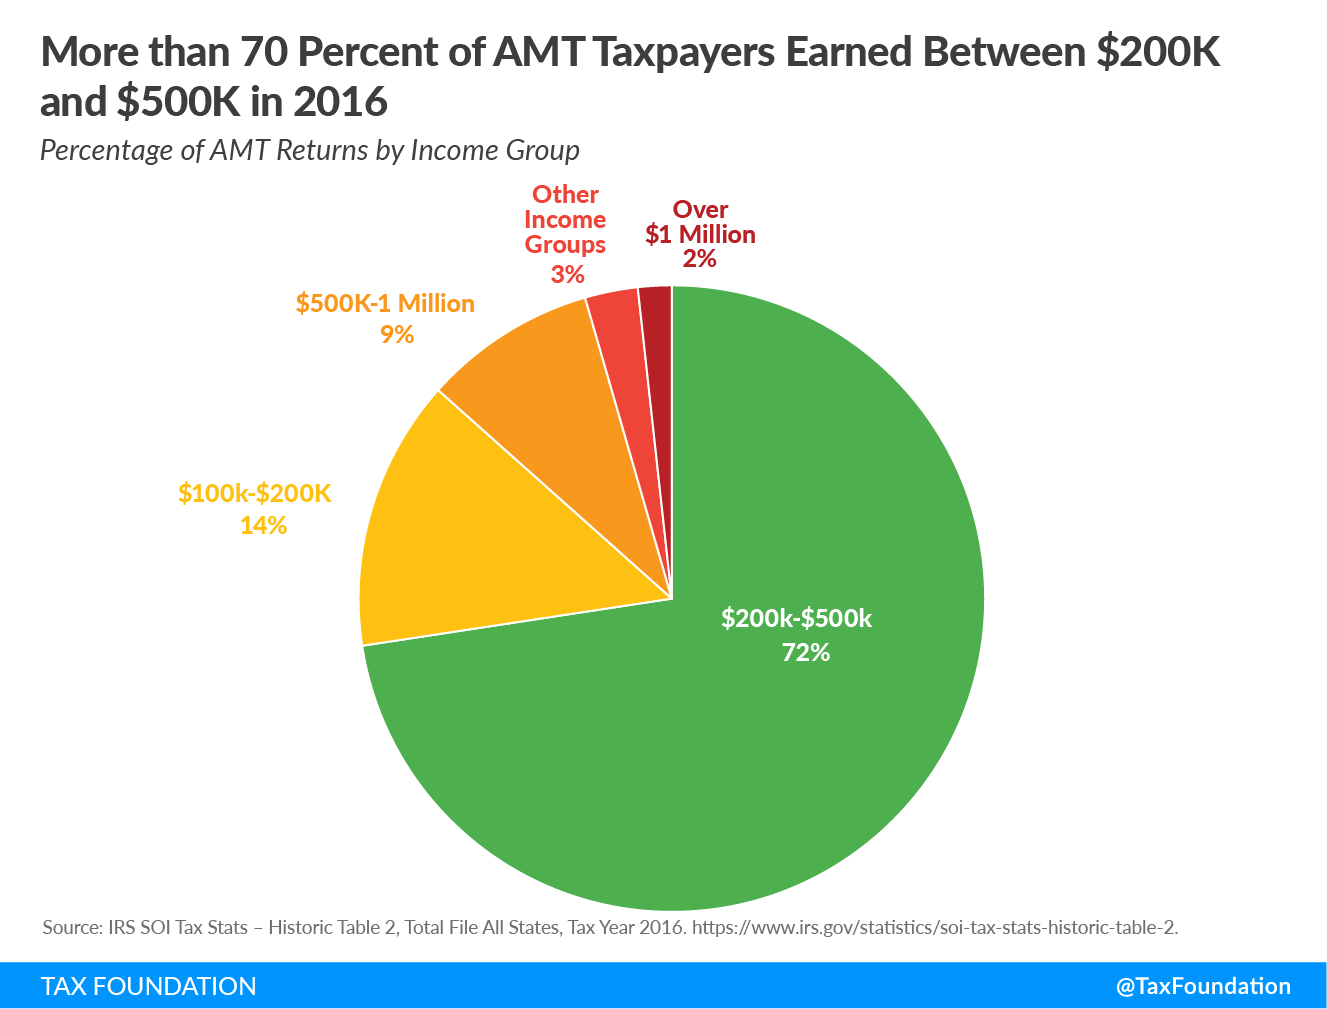 More than 70% of AMT taxpayers earned between $200k and $500k in 2016